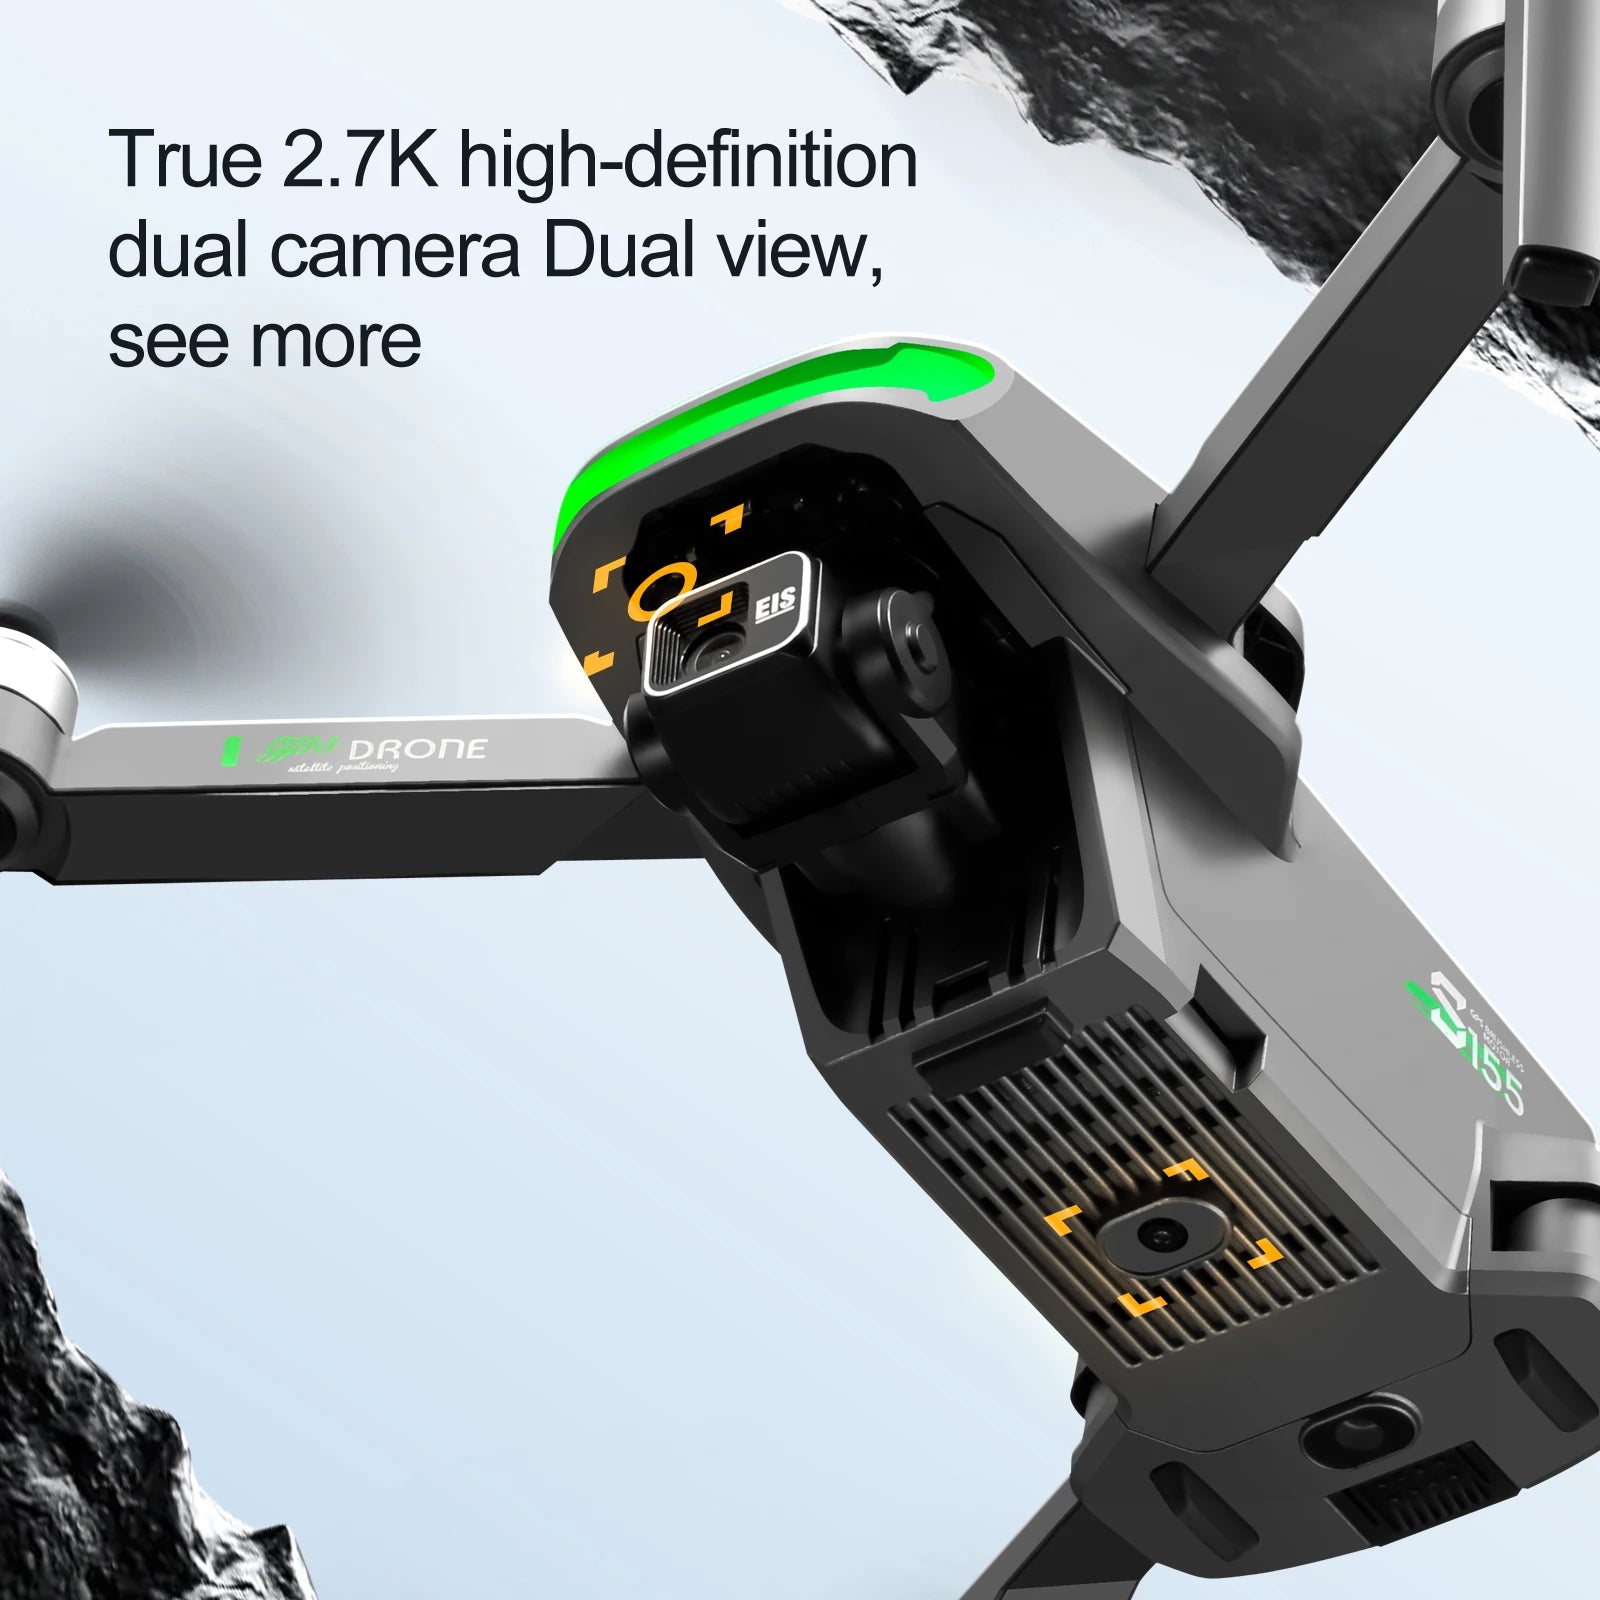 S155 Pro GPS Drone, the drone supports Wi-Fi connection, enabling seamless transfer of photos and videos to mobile devices